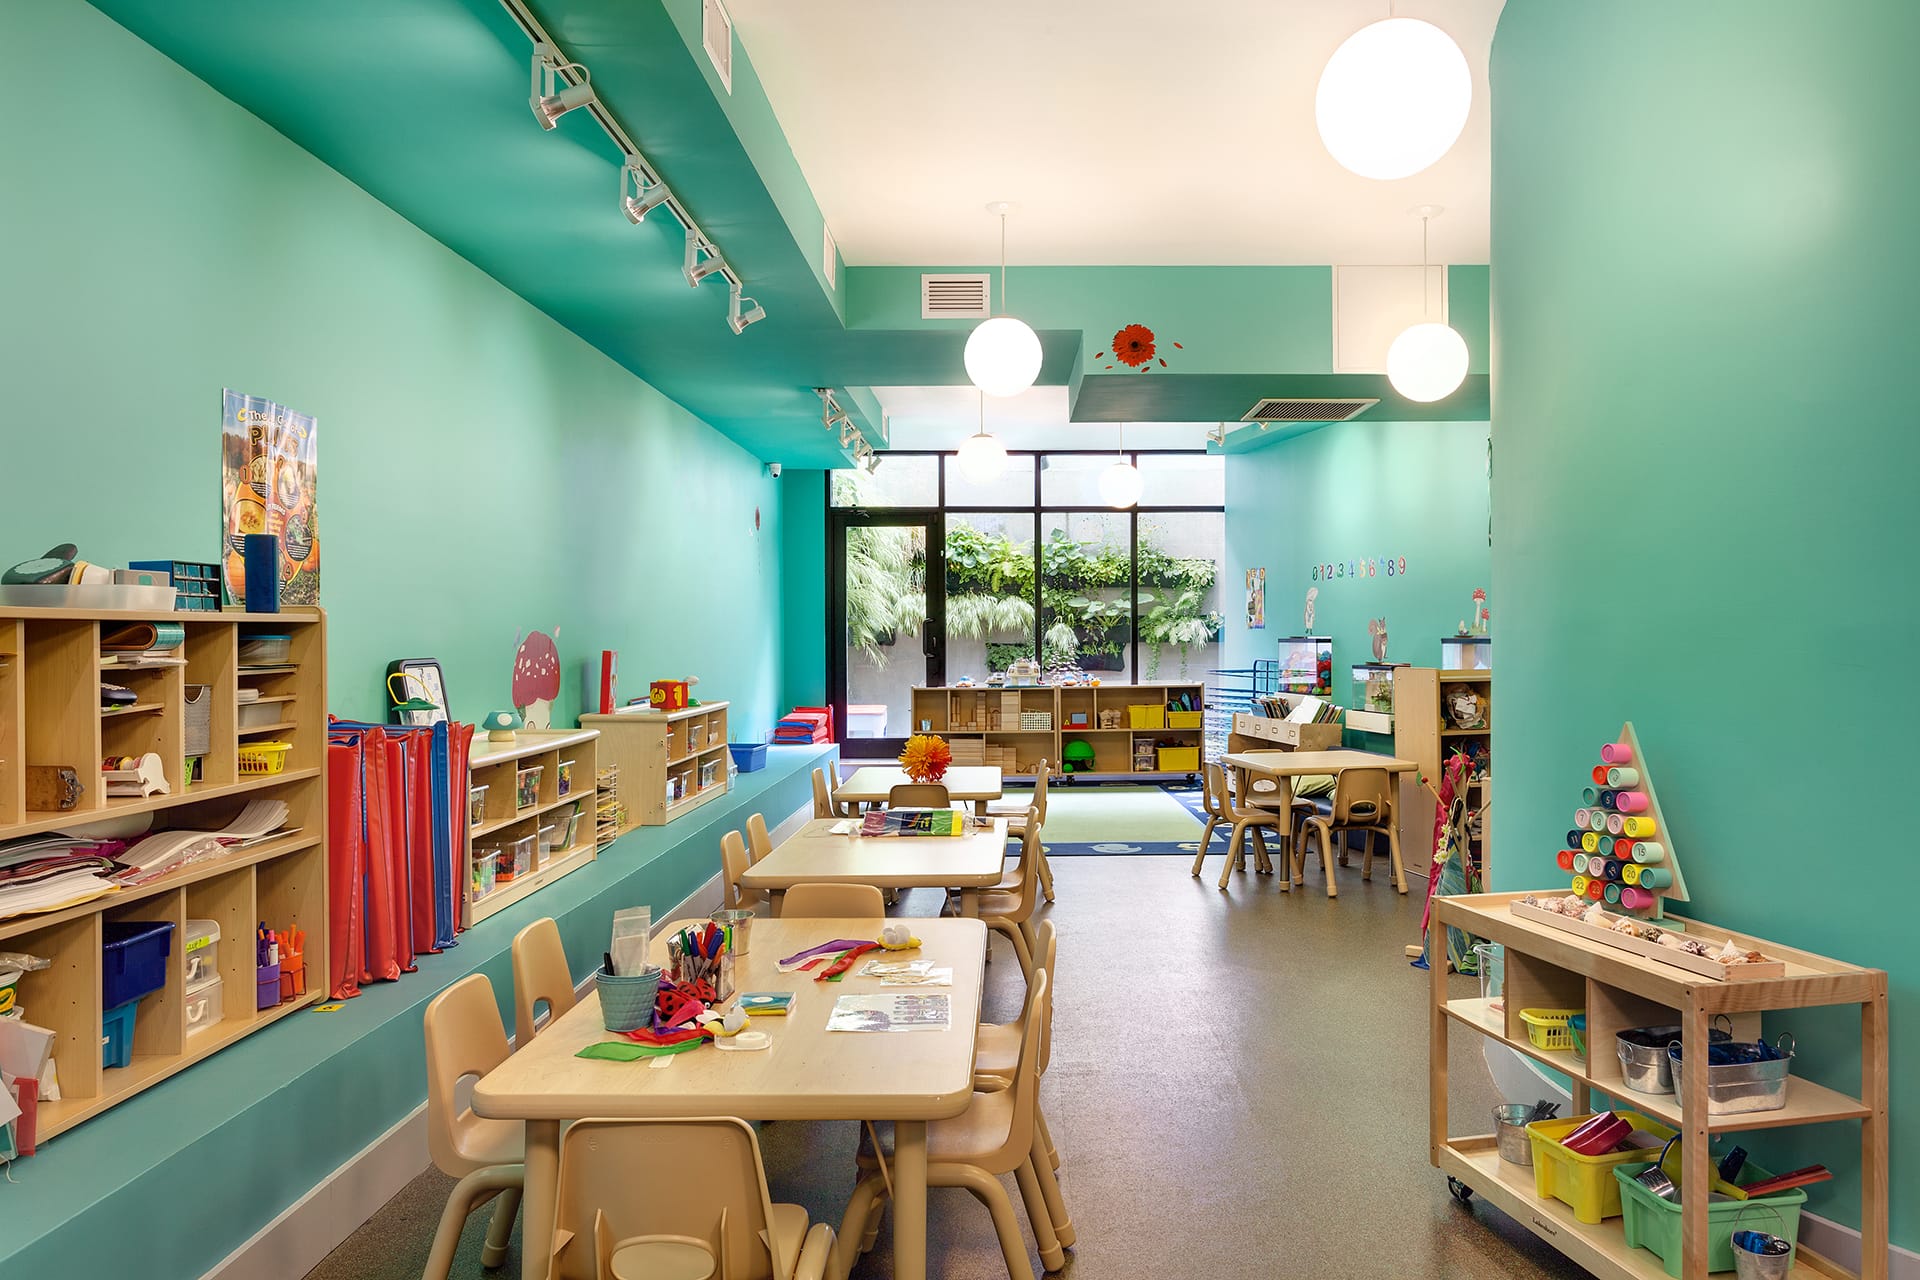 Teal-painted classroom with spherical pendant lights and a door leading to the rear yard